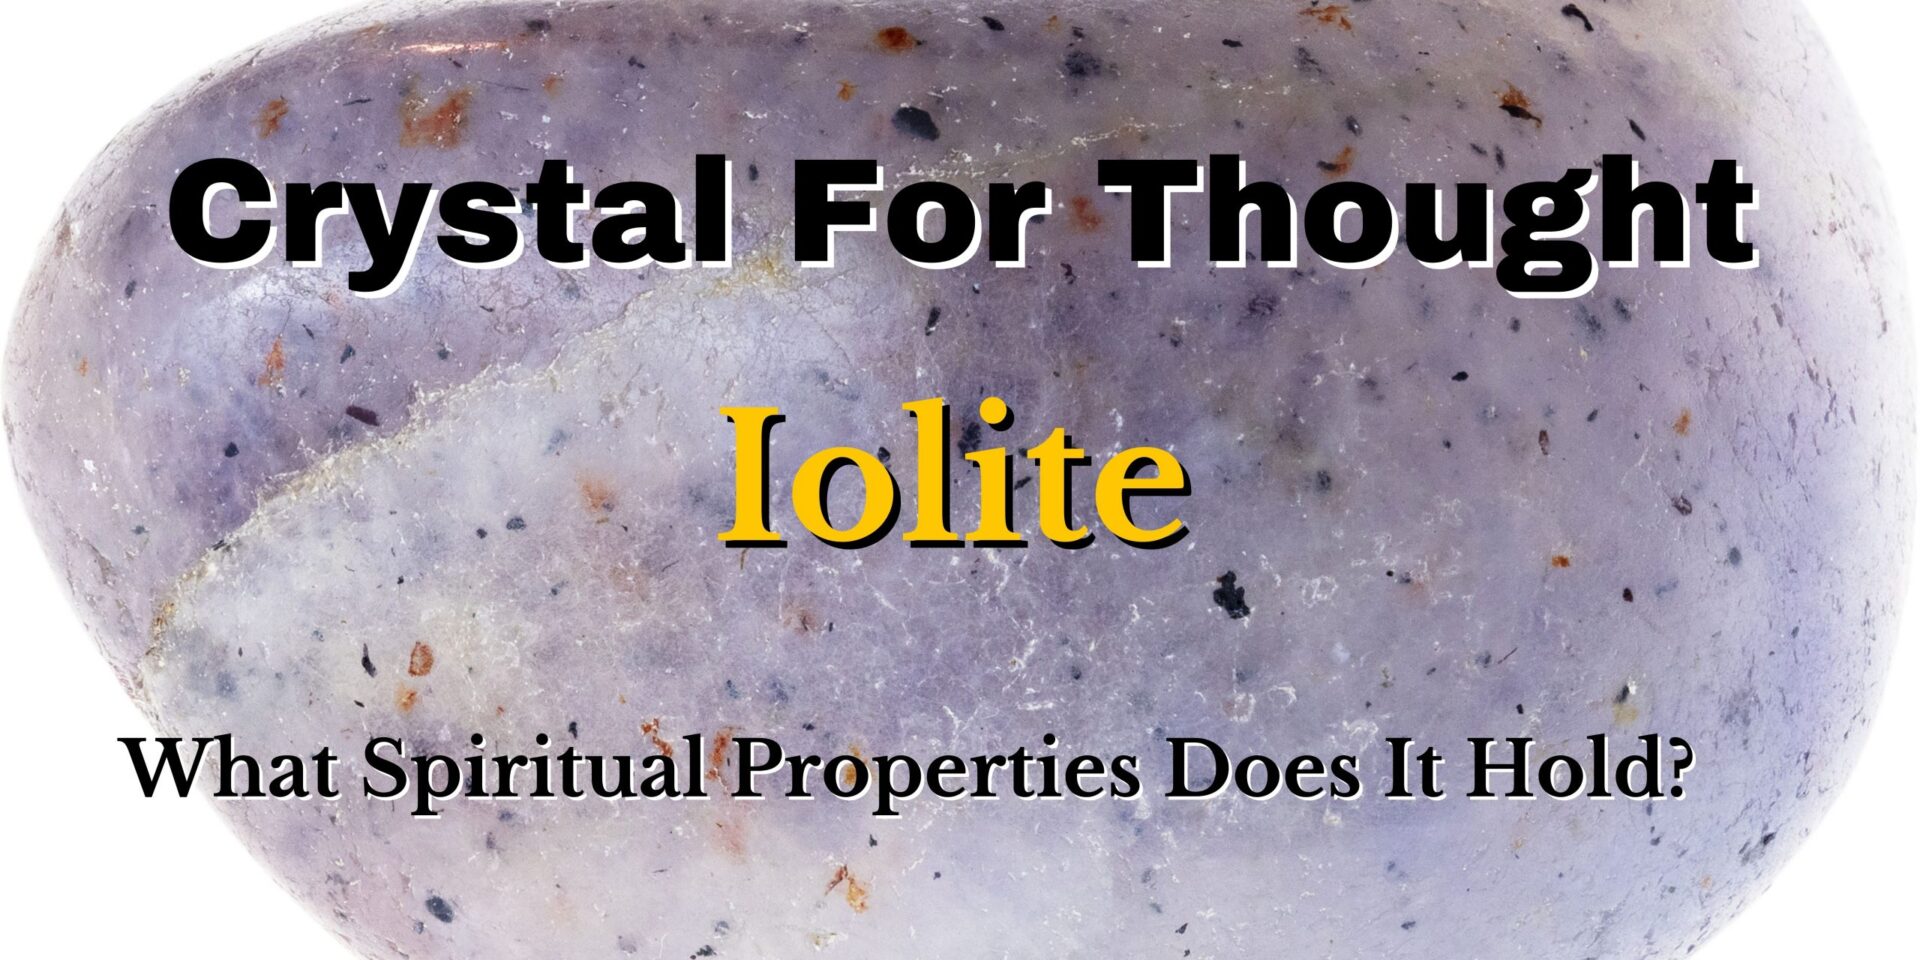 crystal for thought : iolite - spiritual meanings